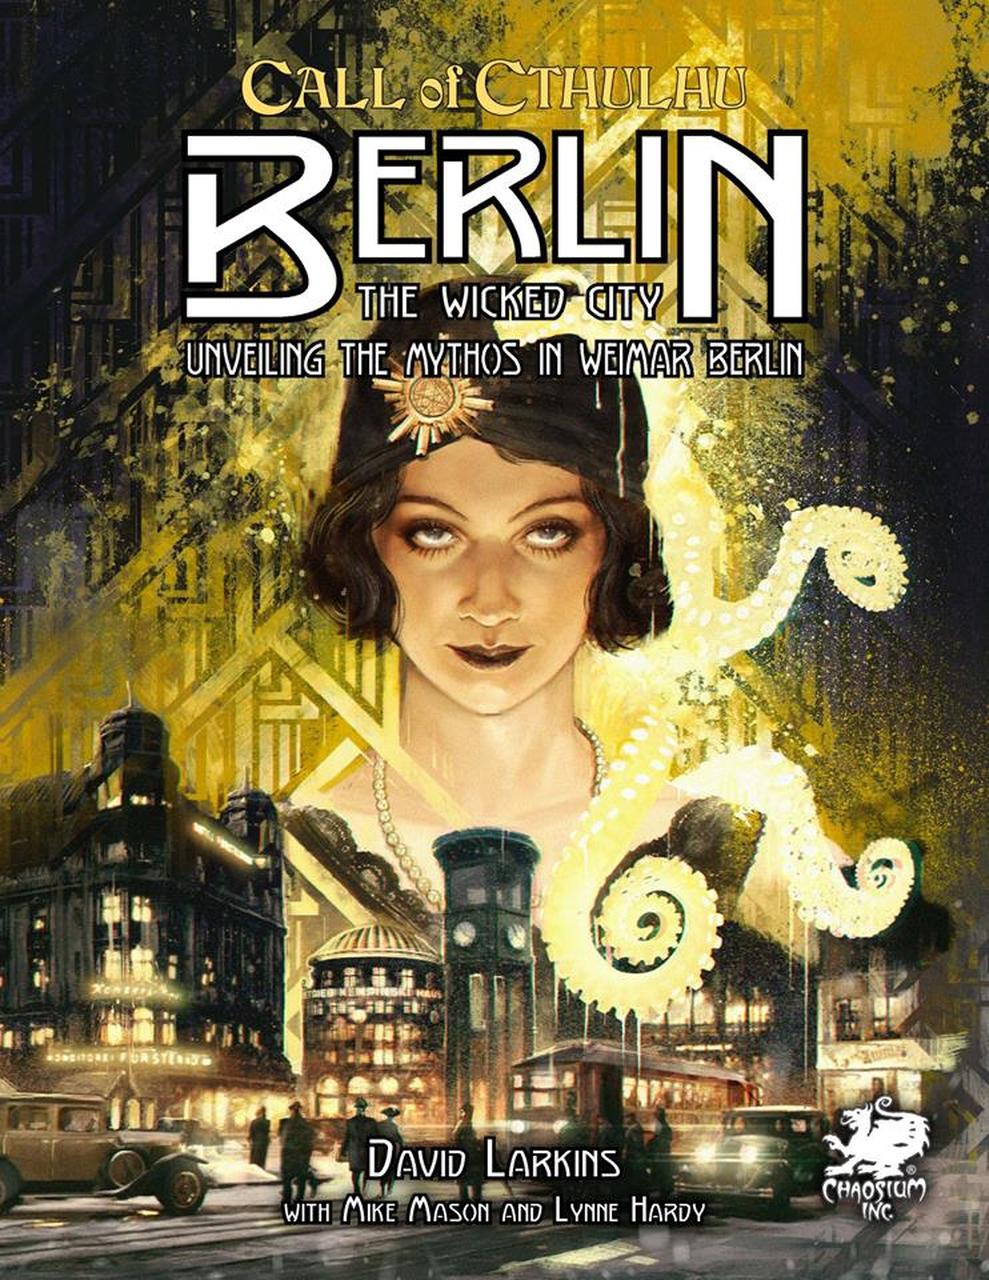 Call of Cthulhu 7E - Berlin the Wicked City